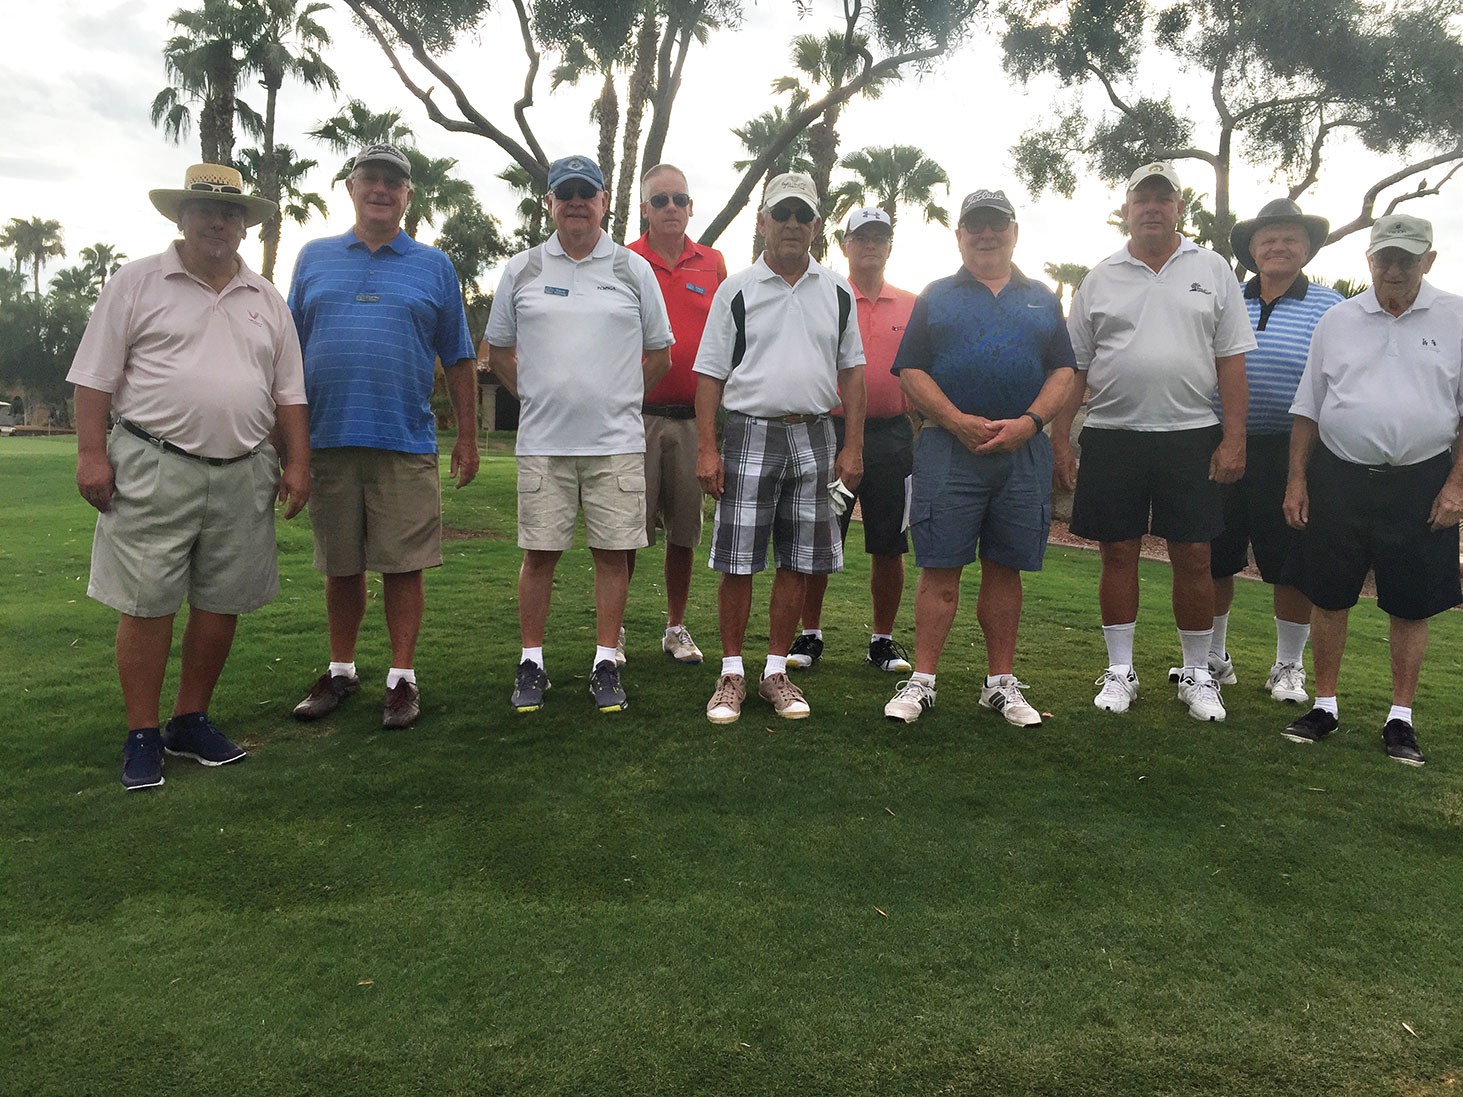 Left to right: Ray Clements, Charlie Wiley, Dave Kennedy, Chris Jeans, Dave Lanigan, Monte Page, John Craven, Randy Prinz, Greg Ray and Peter Caviolo; not in photo, Richard Rippe and Chris Mucha